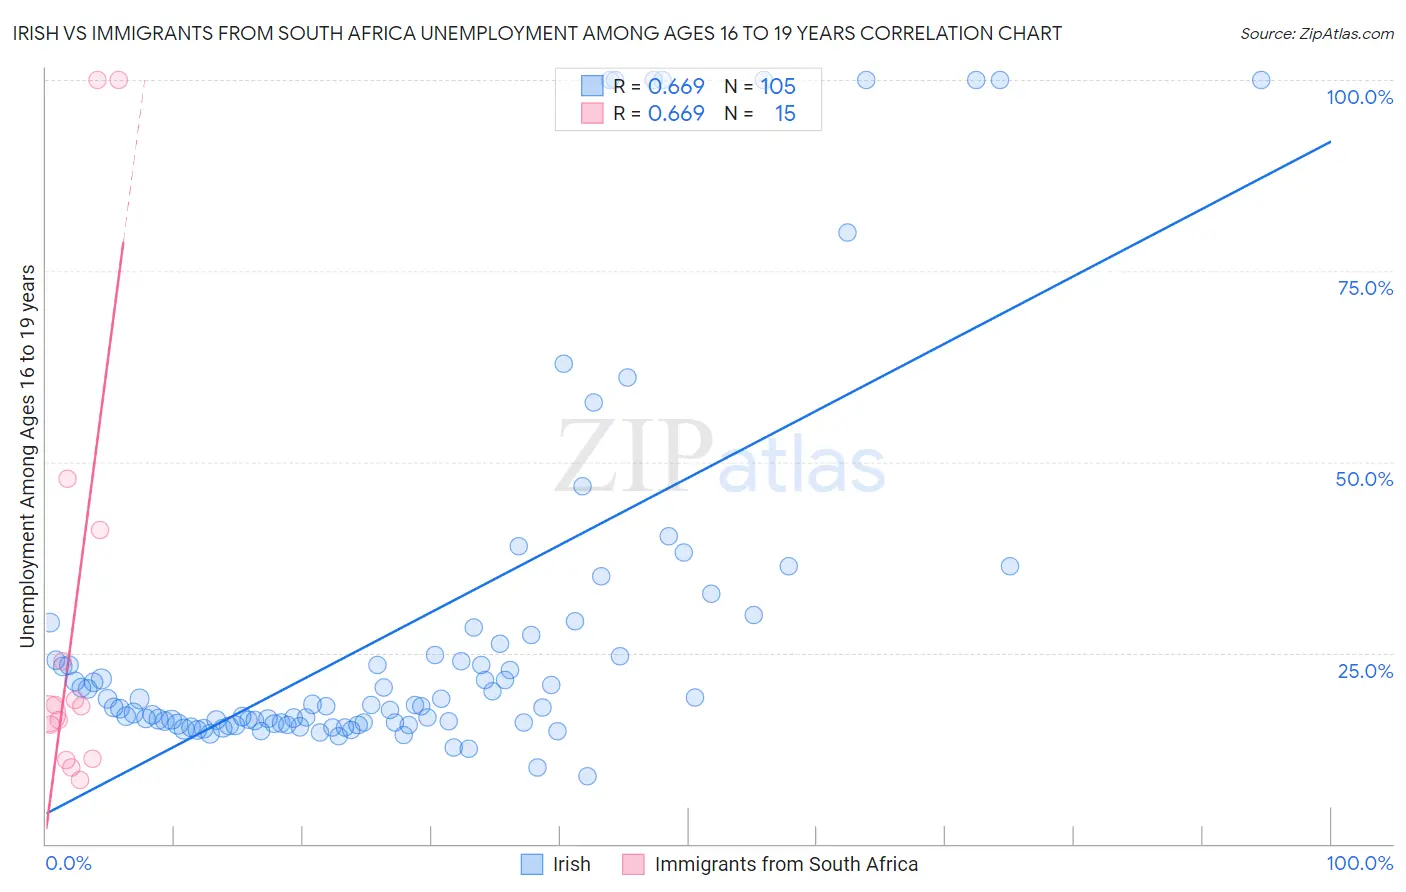 Irish vs Immigrants from South Africa Unemployment Among Ages 16 to 19 years